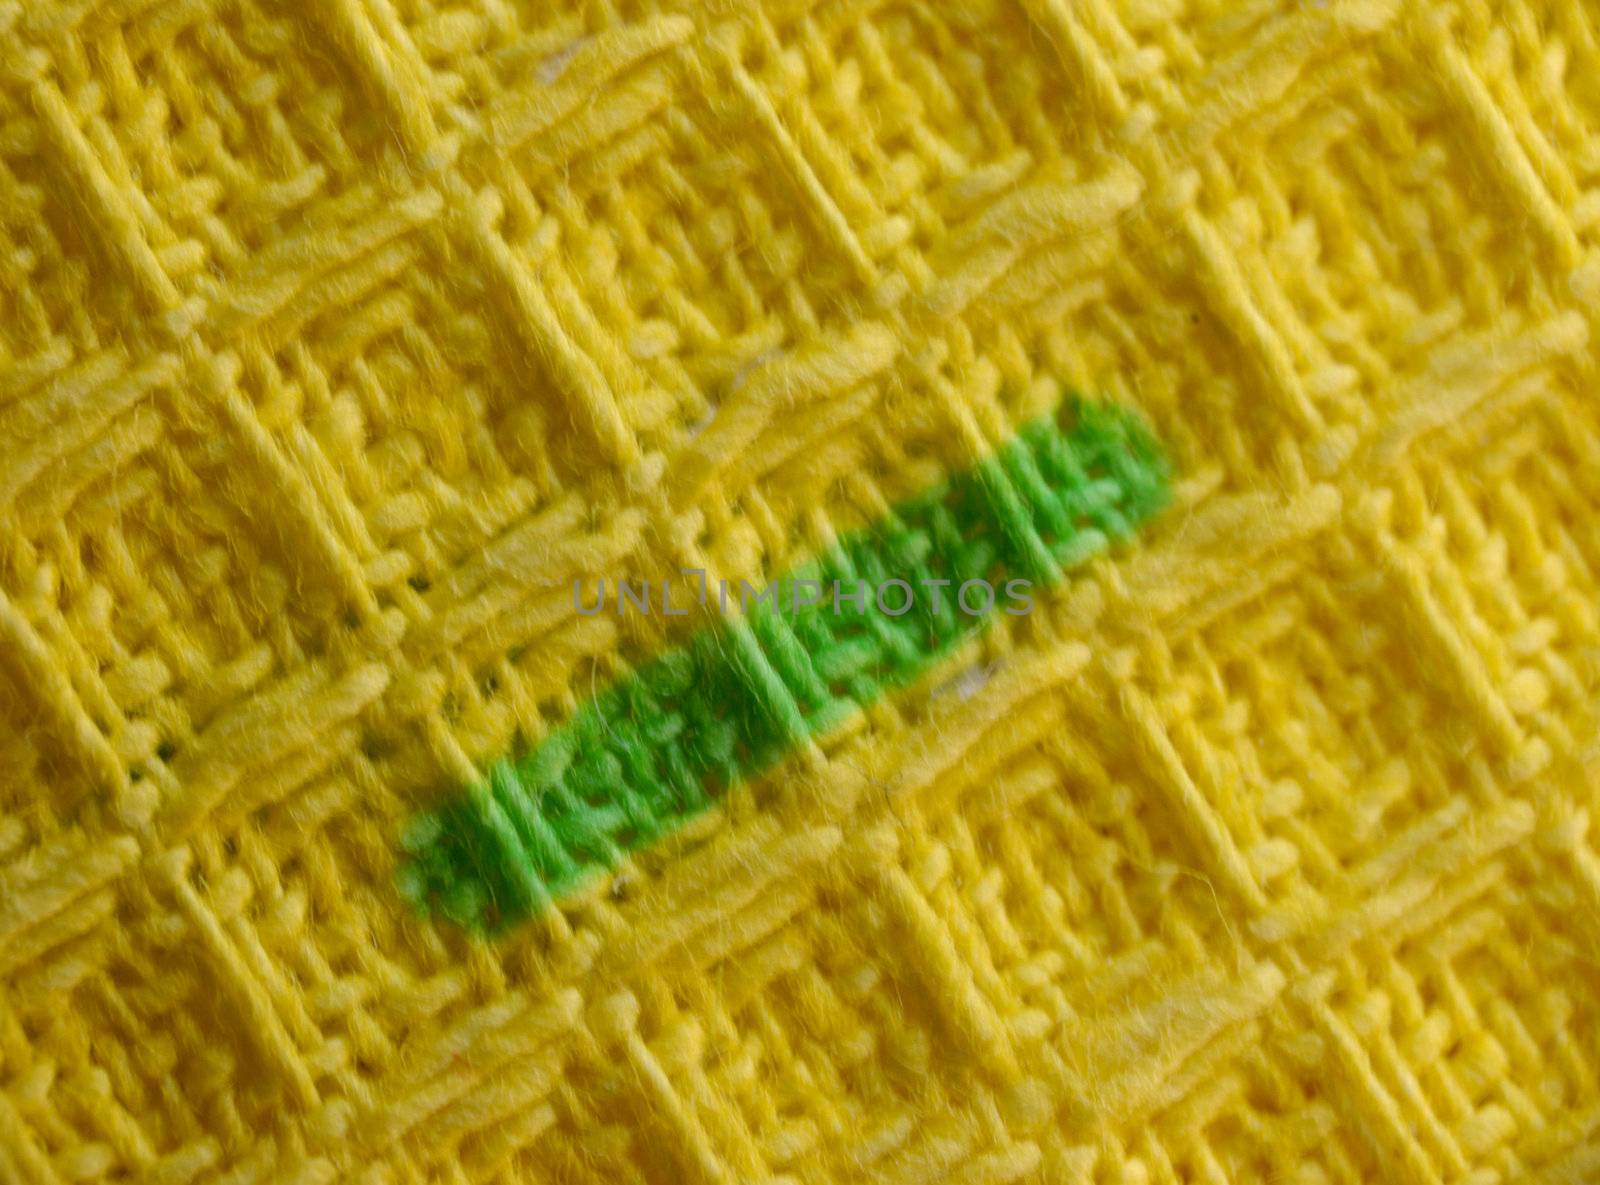 macro pattern of yellow textile fabric with green strip